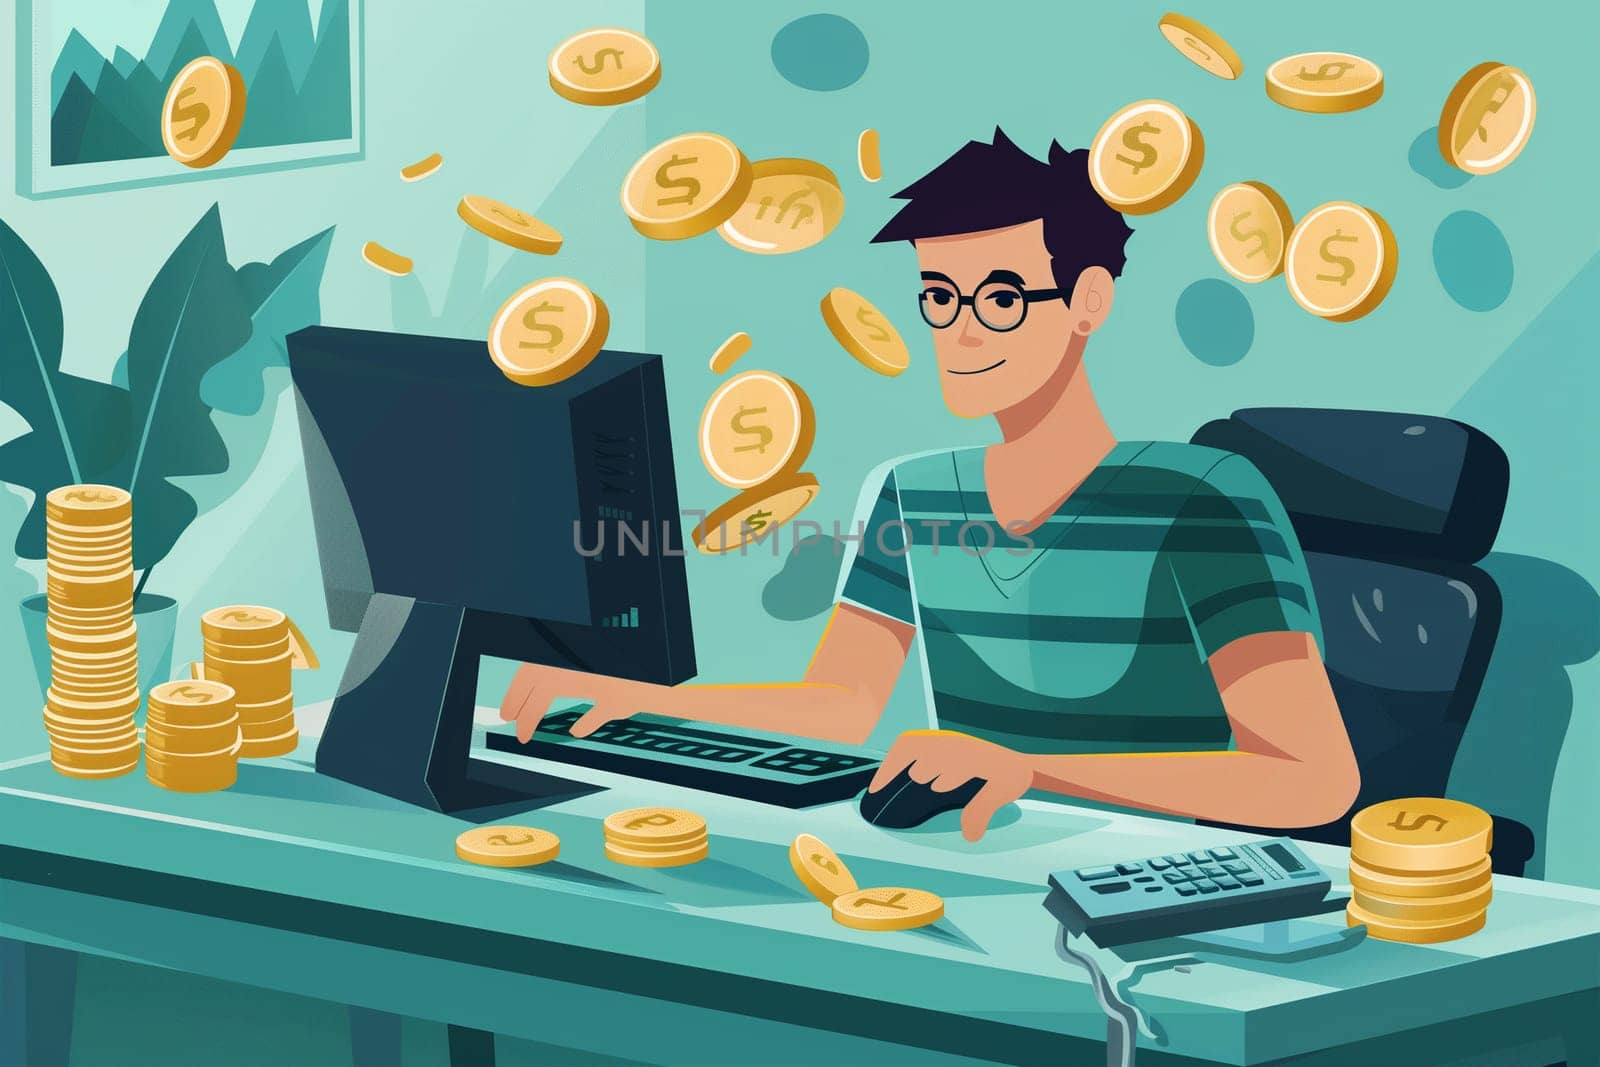 Man Sitting at Computer With Coins Flying by Sd28DimoN_1976